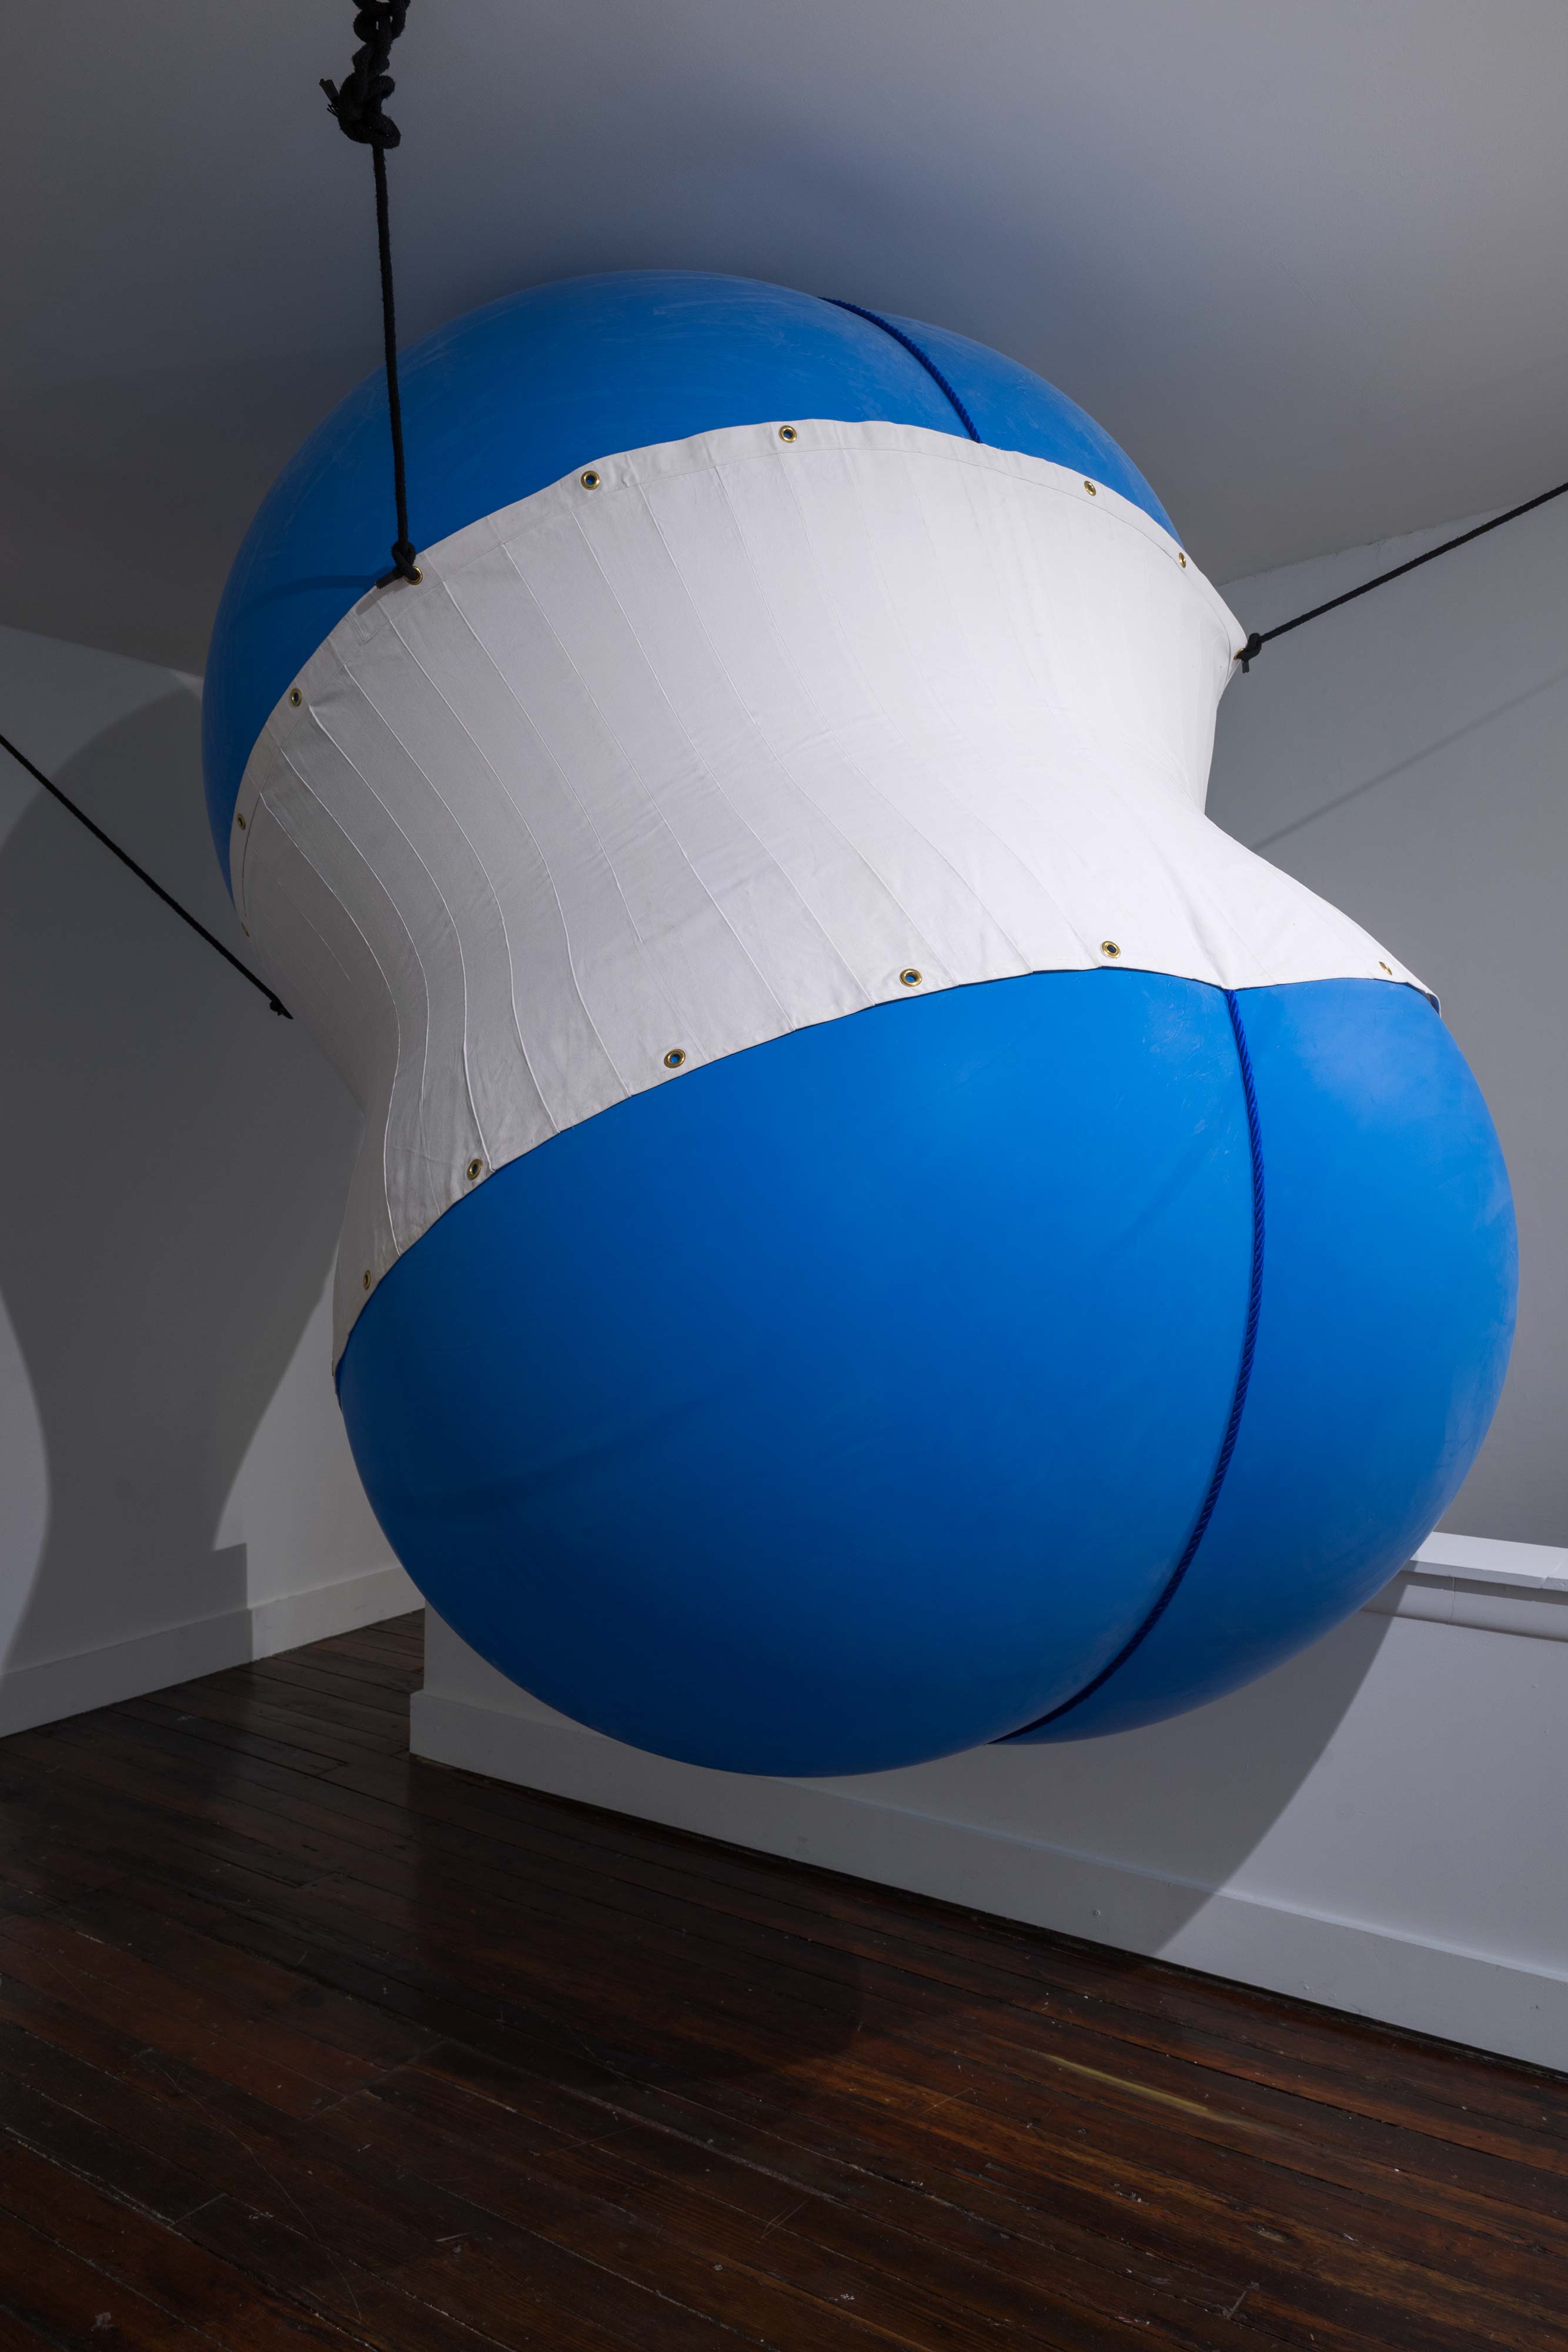 Nancy Davidson<br>Blue Moon (detail)<br>1998<br>Latex, rope, cotton<br>76 x 60 x 60 in (193 x 152 x 152 cm), installation variable